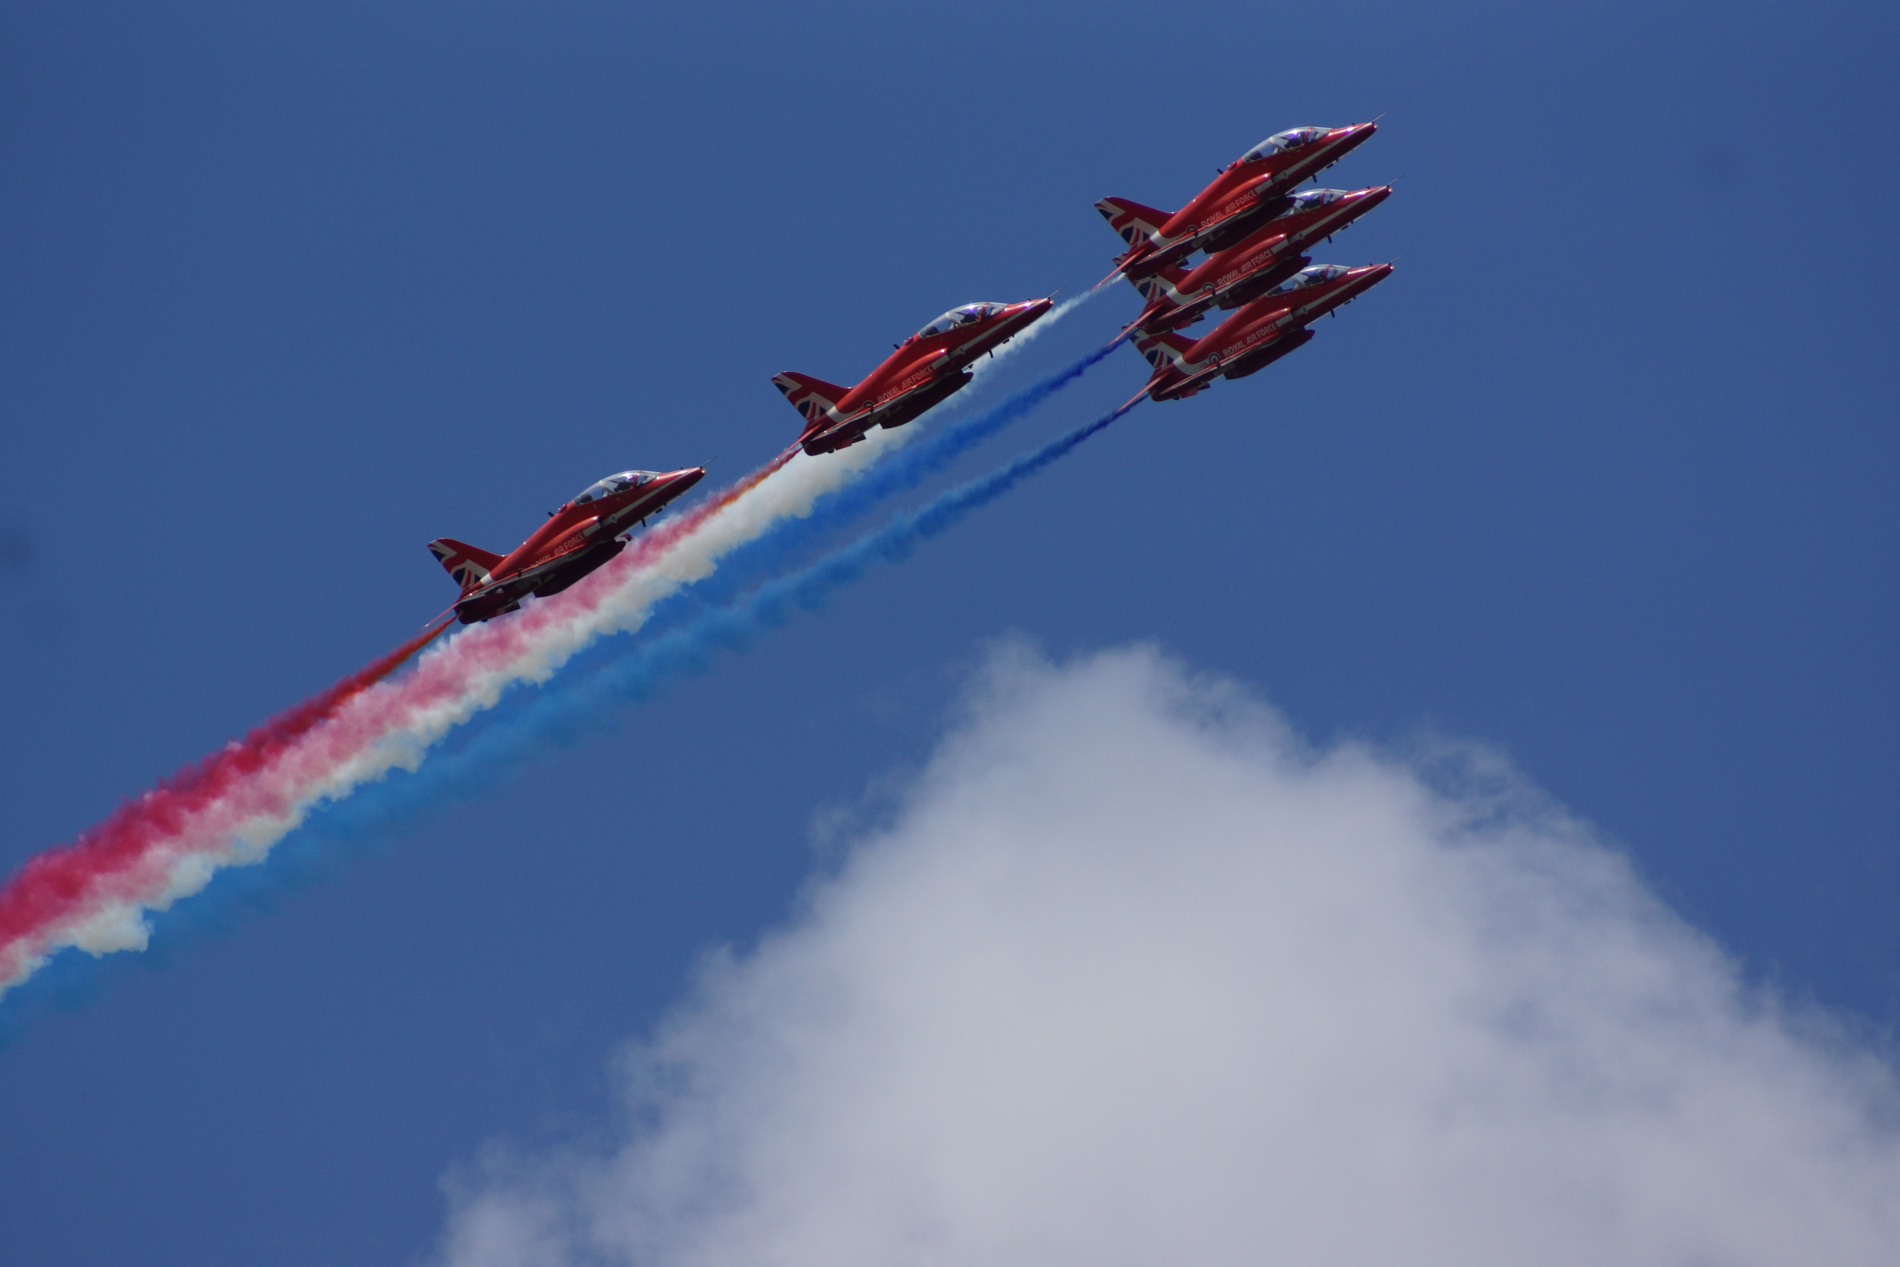 Image of the Red Arrows (as an example of a High Performance Team).